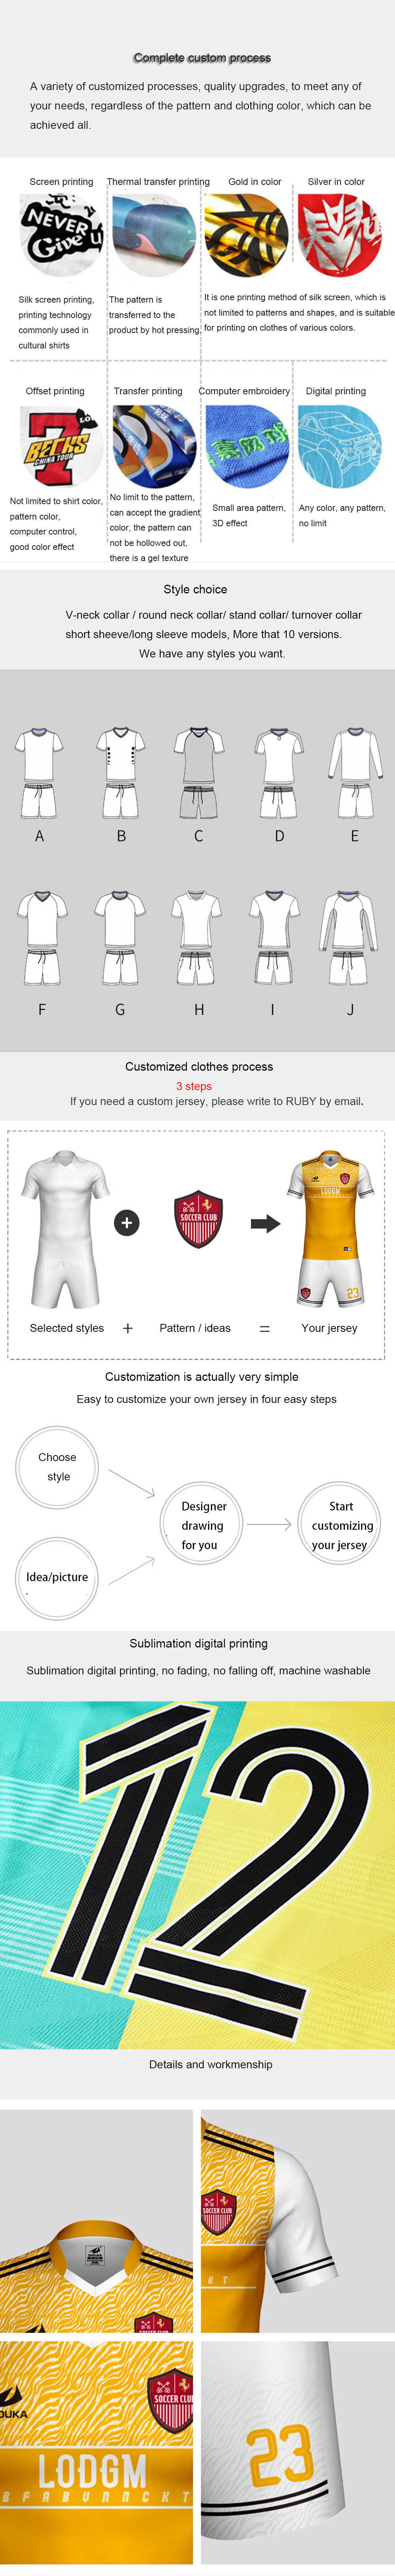 High Quality Cheap Plain Retro Soccer Jersey Breathable Football Soccer Jersey Uniforms